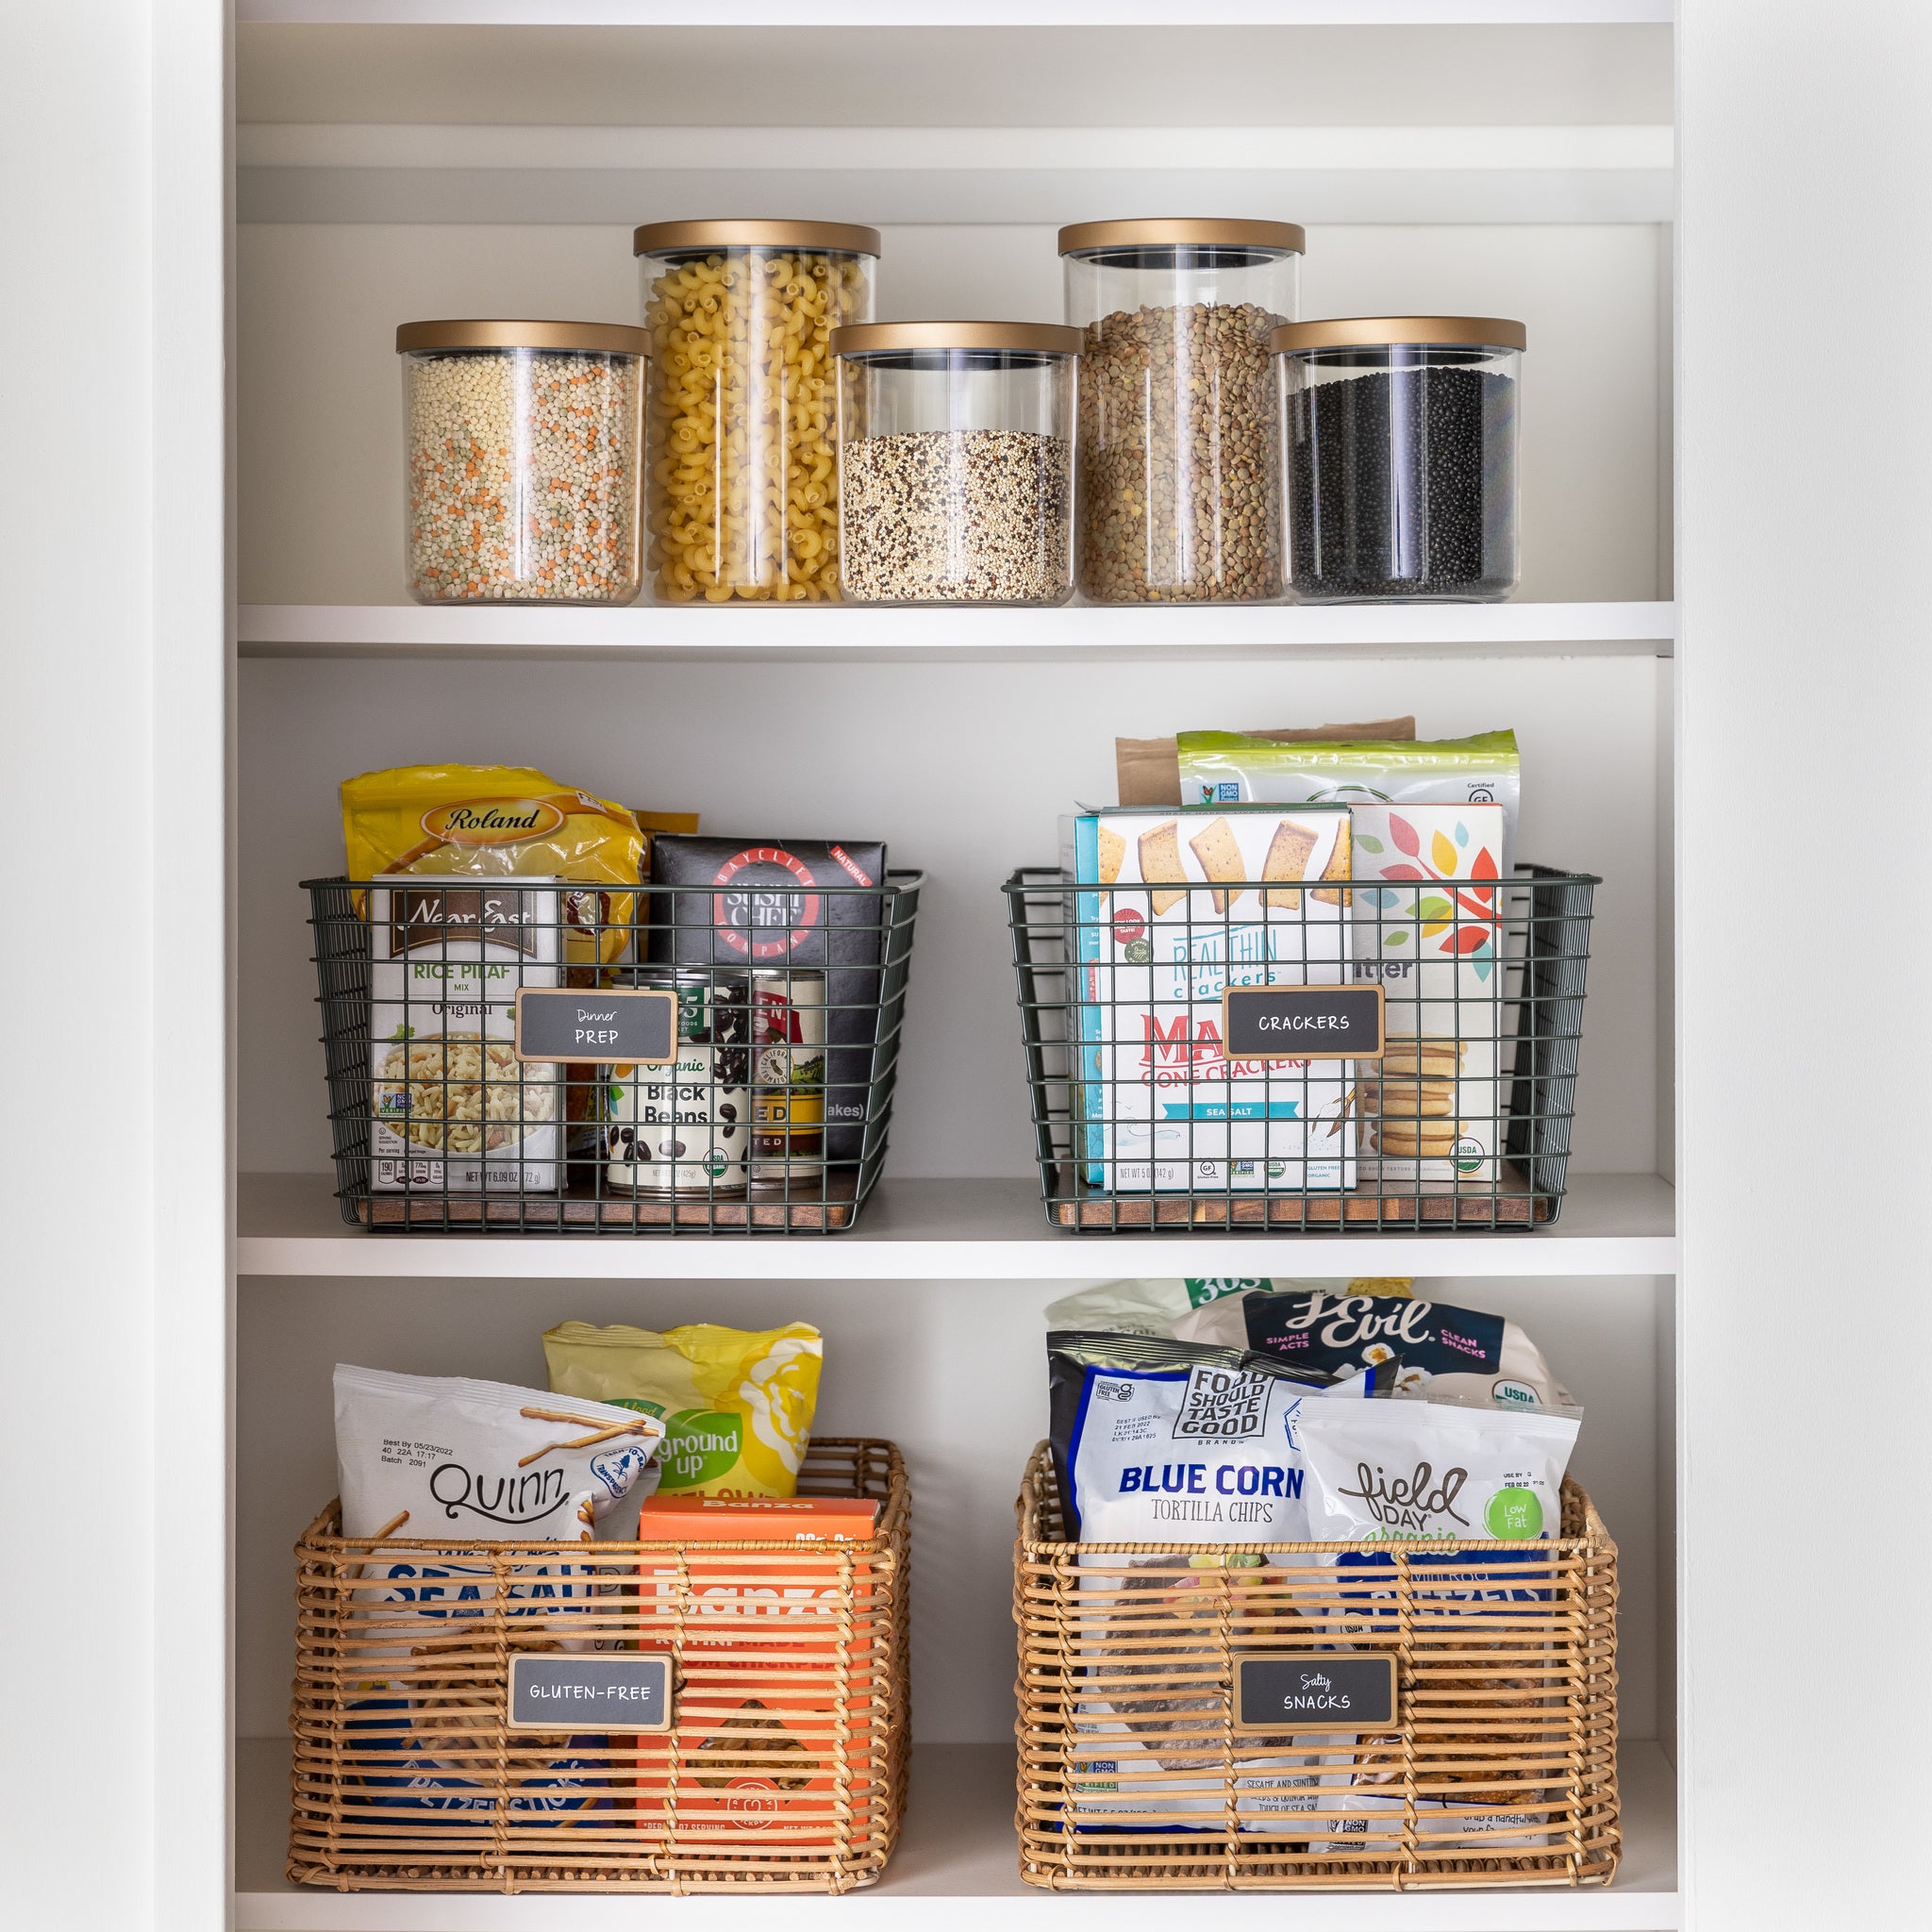 17 Pantry Organization Ideas for a Neater Kitchen